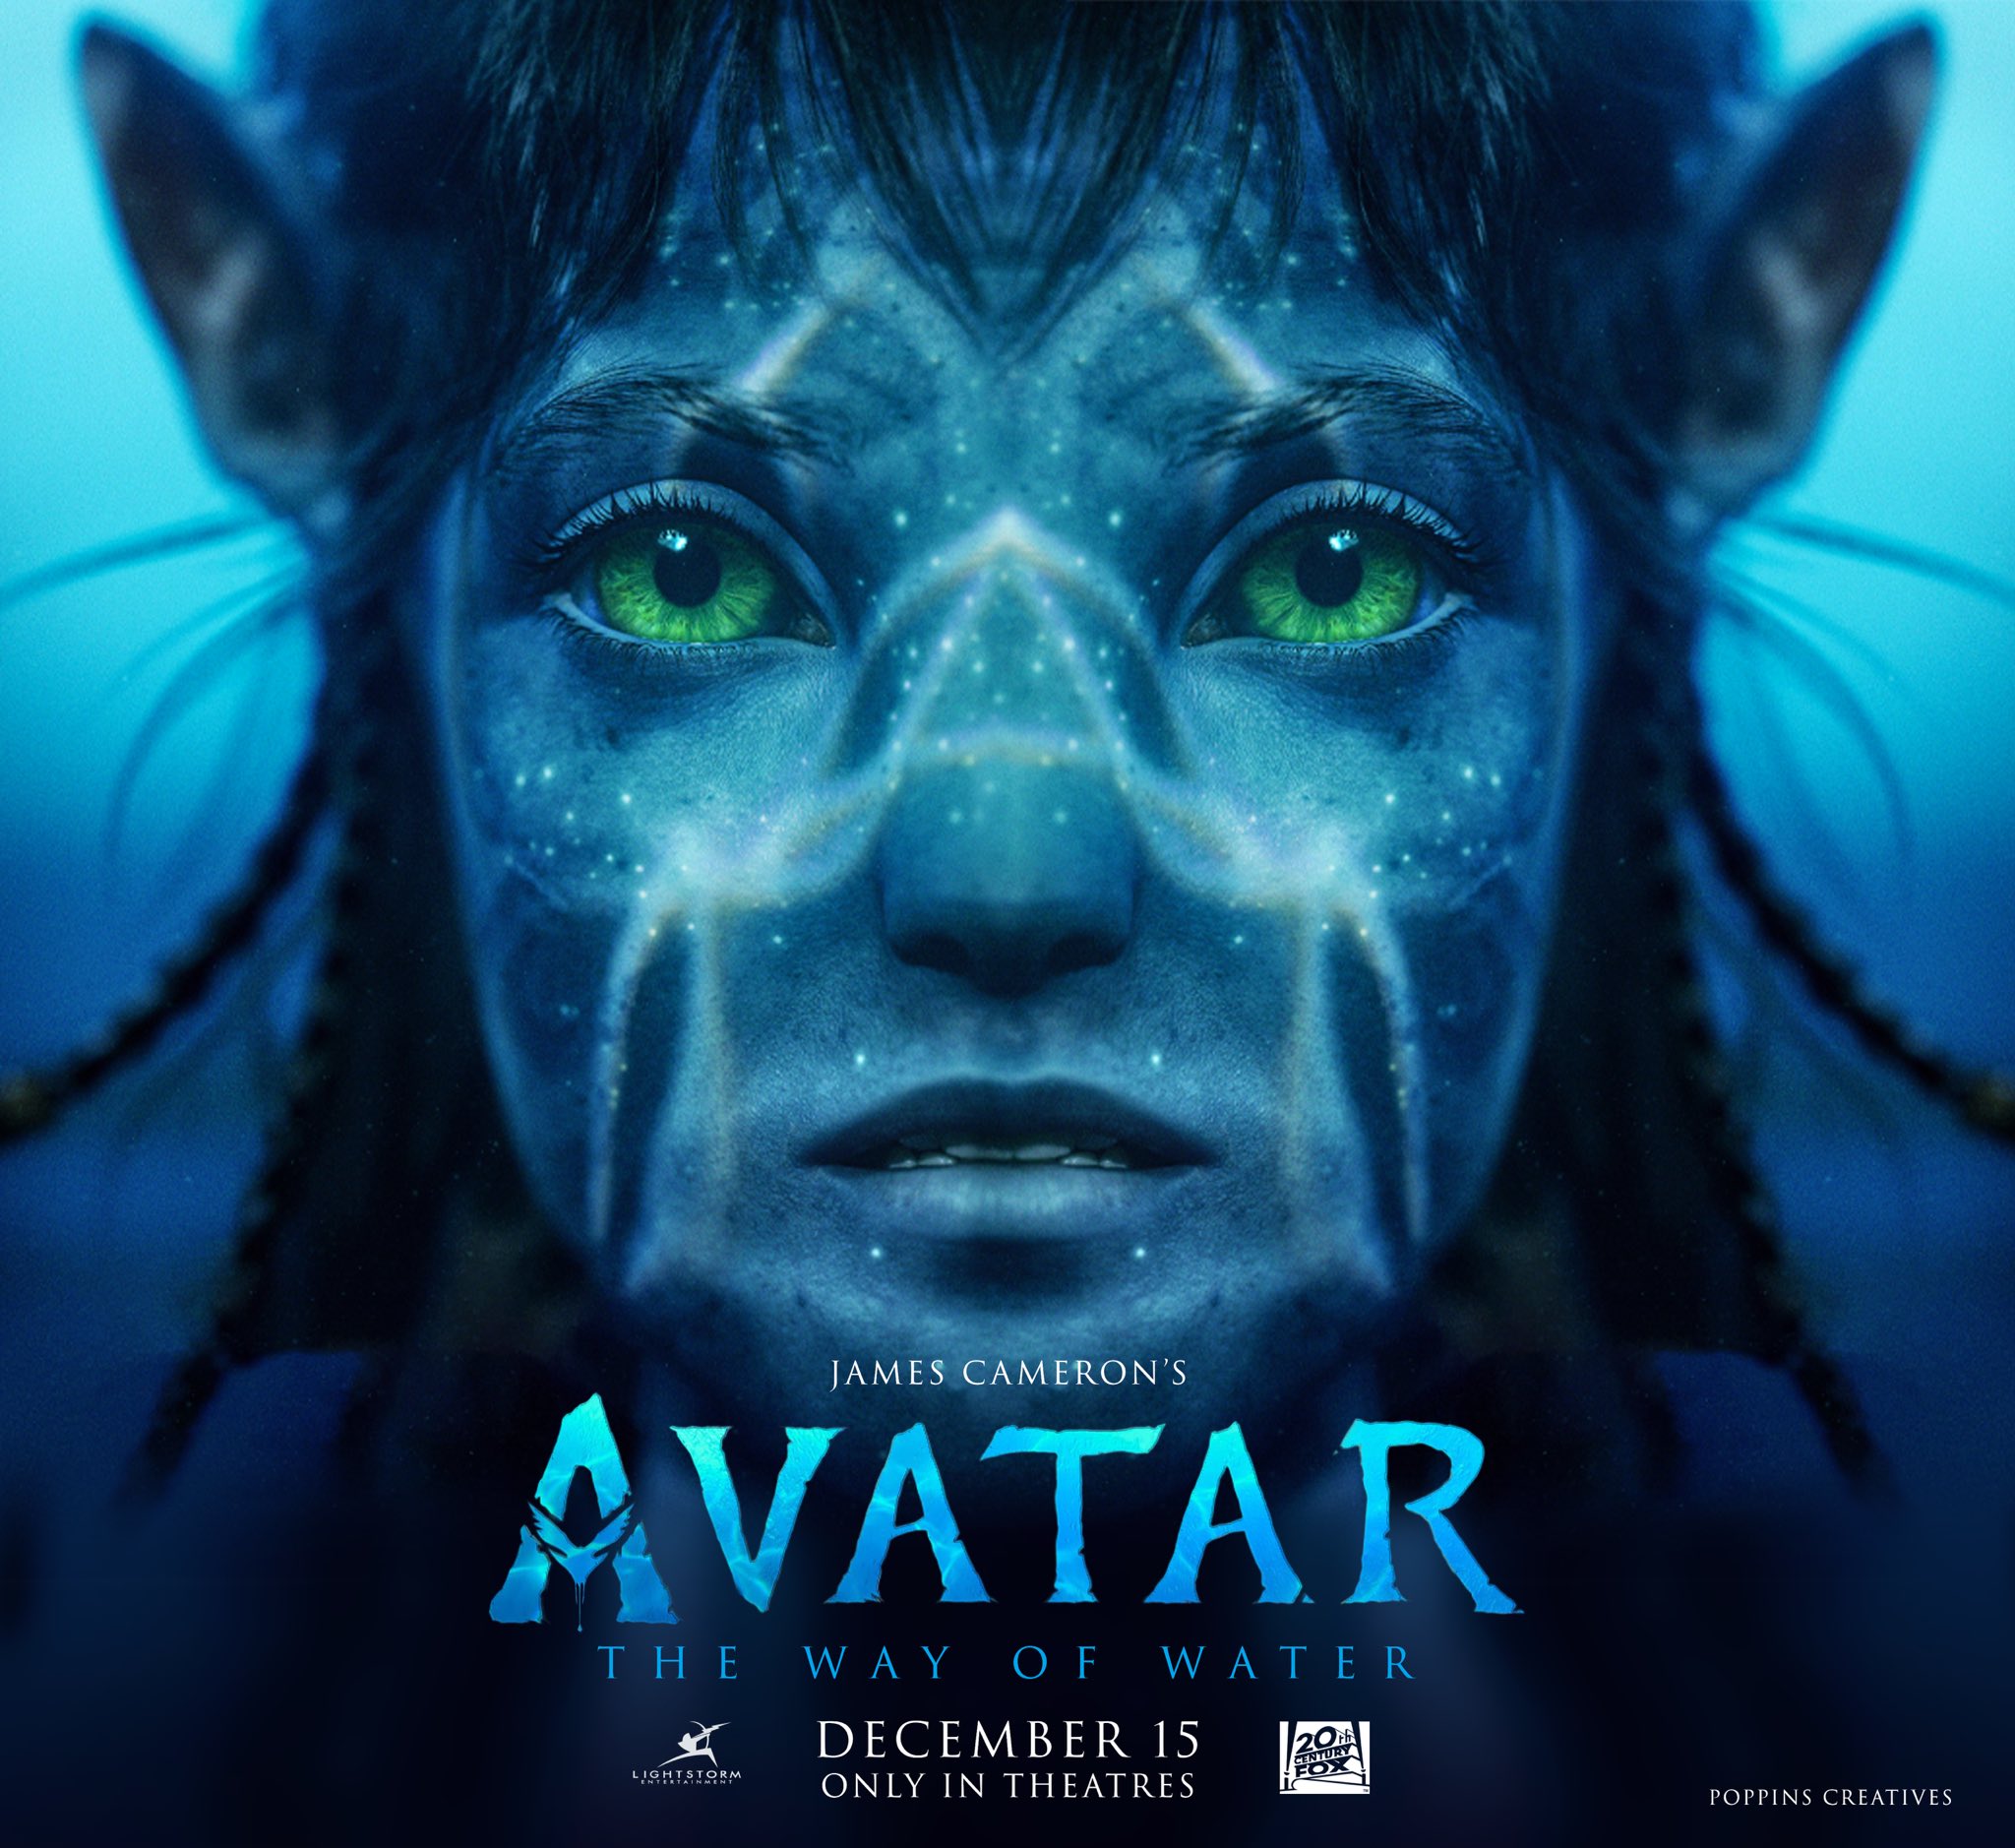 Nishan N Out The Brand New Teaser Poster For Avatar: The Way Of Water. Experience It Only In Theaters December 2022. #AvatarTheWayOfWater #Avatar2